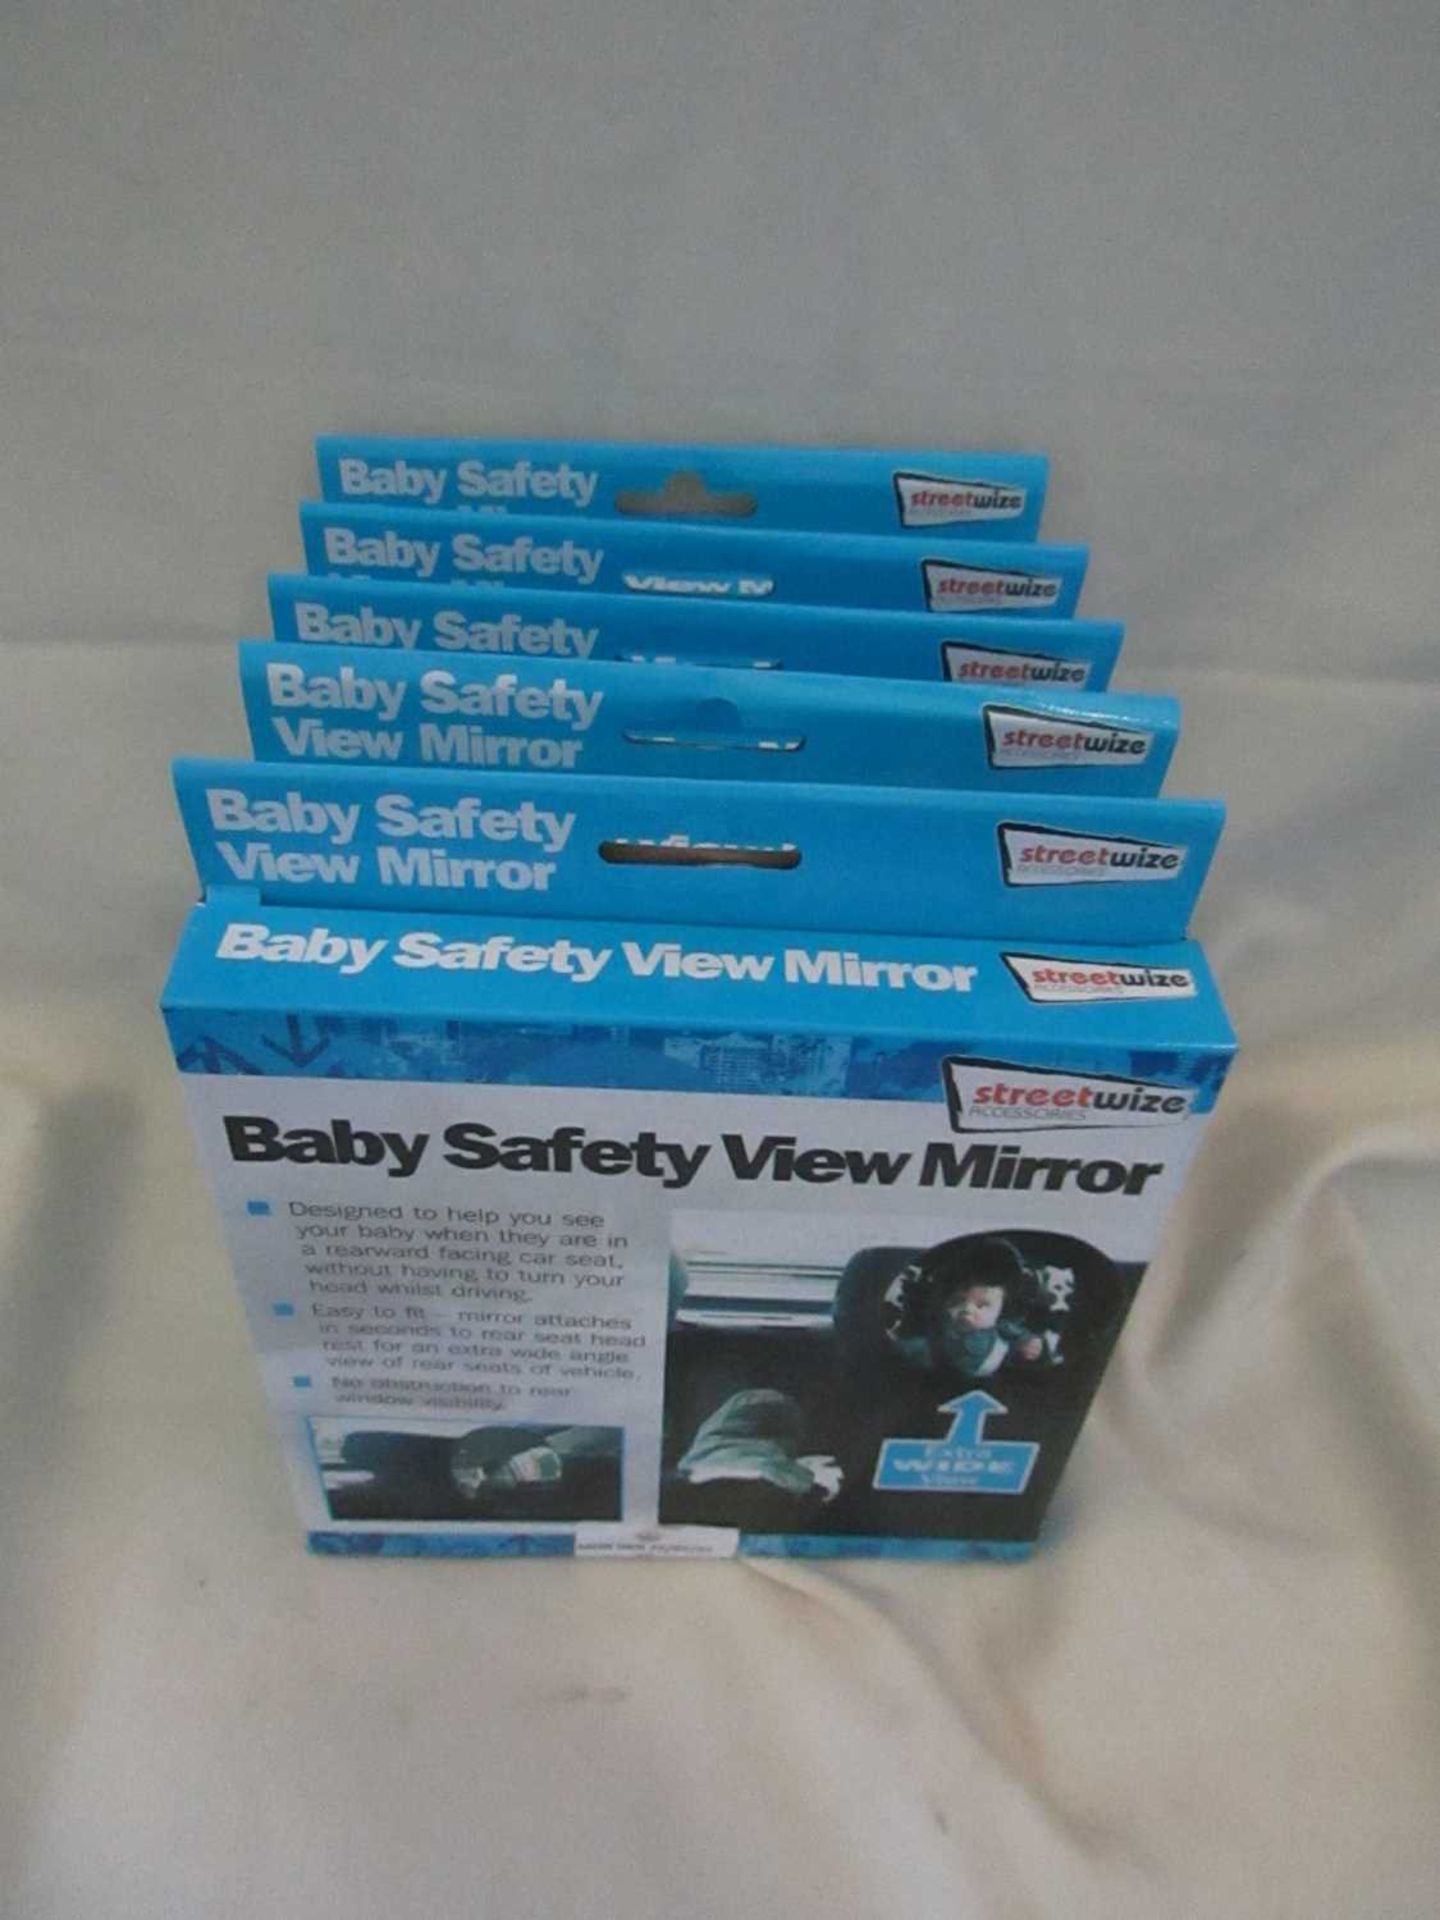 VAT 5x Streetwize - Baby Safety View Mirror - Unused & Boxed.